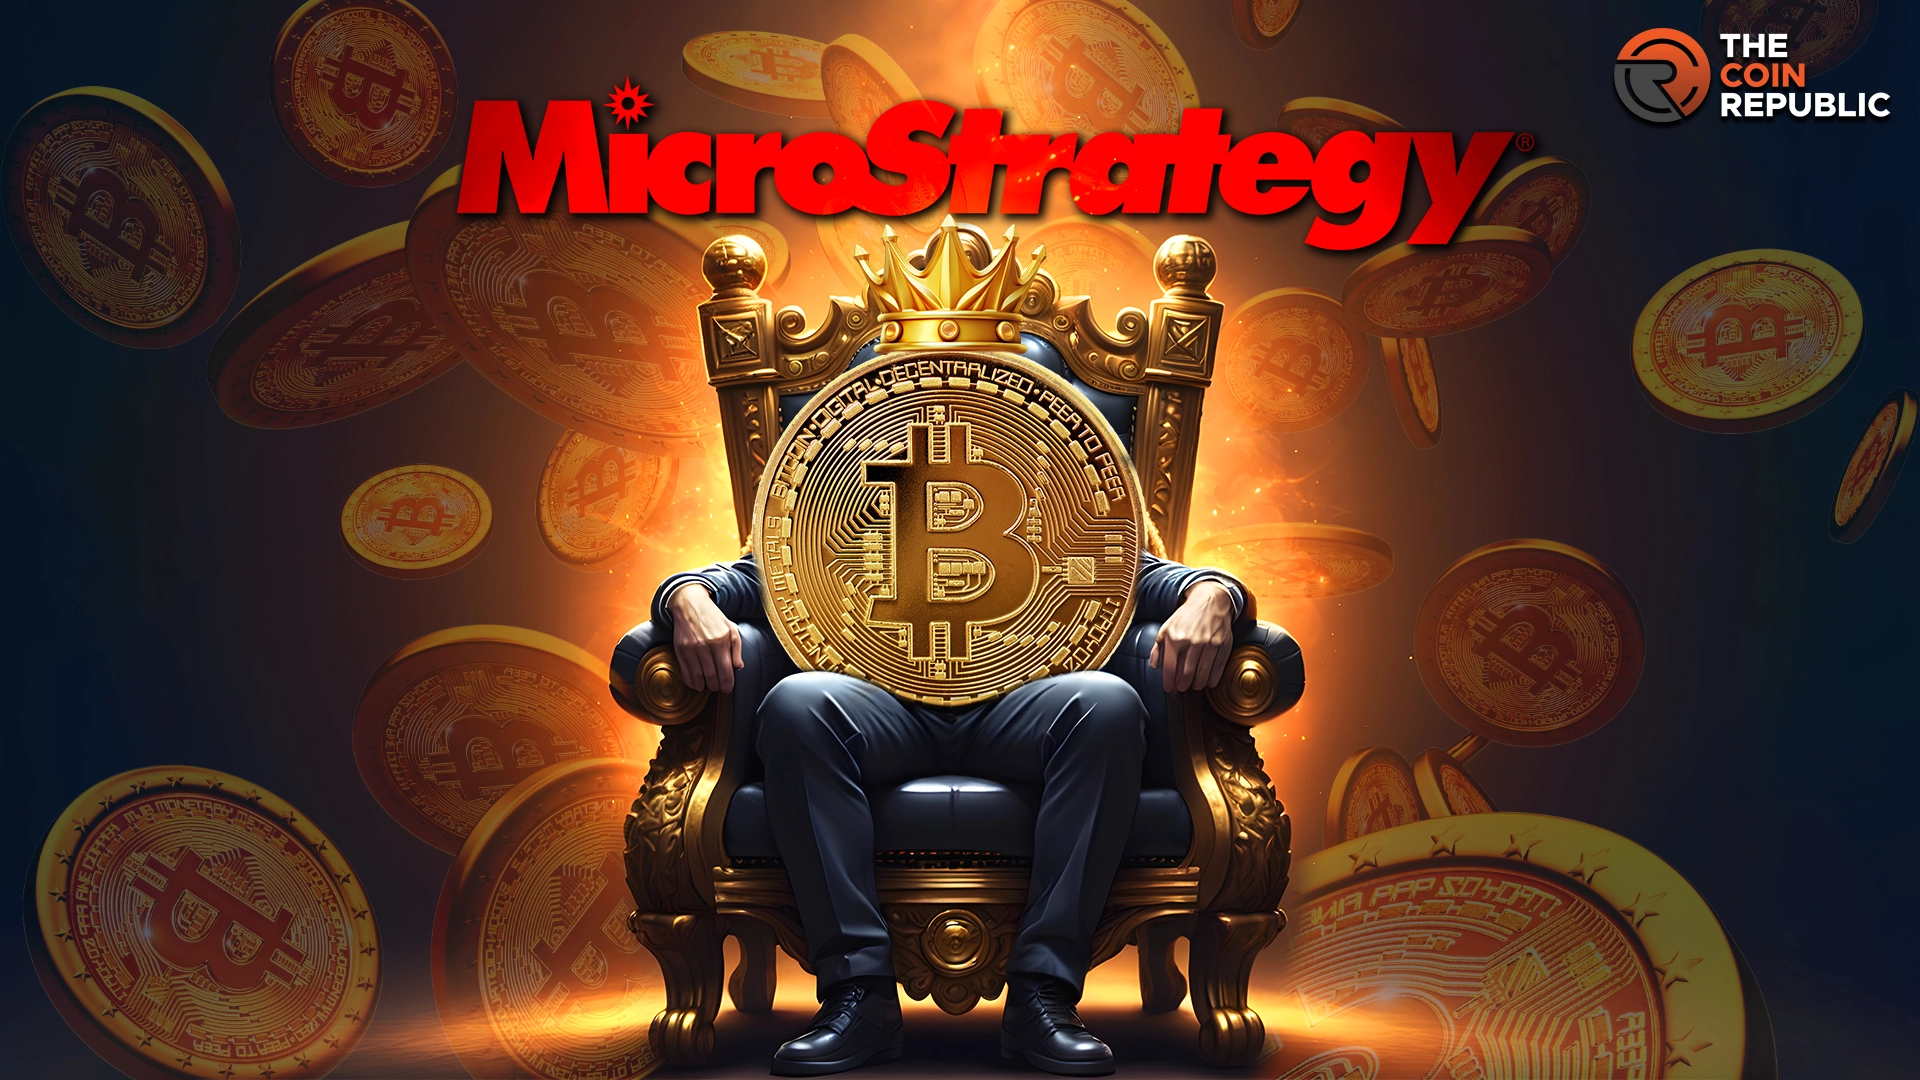 MicroStrategy News: Q1 Financial Update, Bitcoin Holdings & More